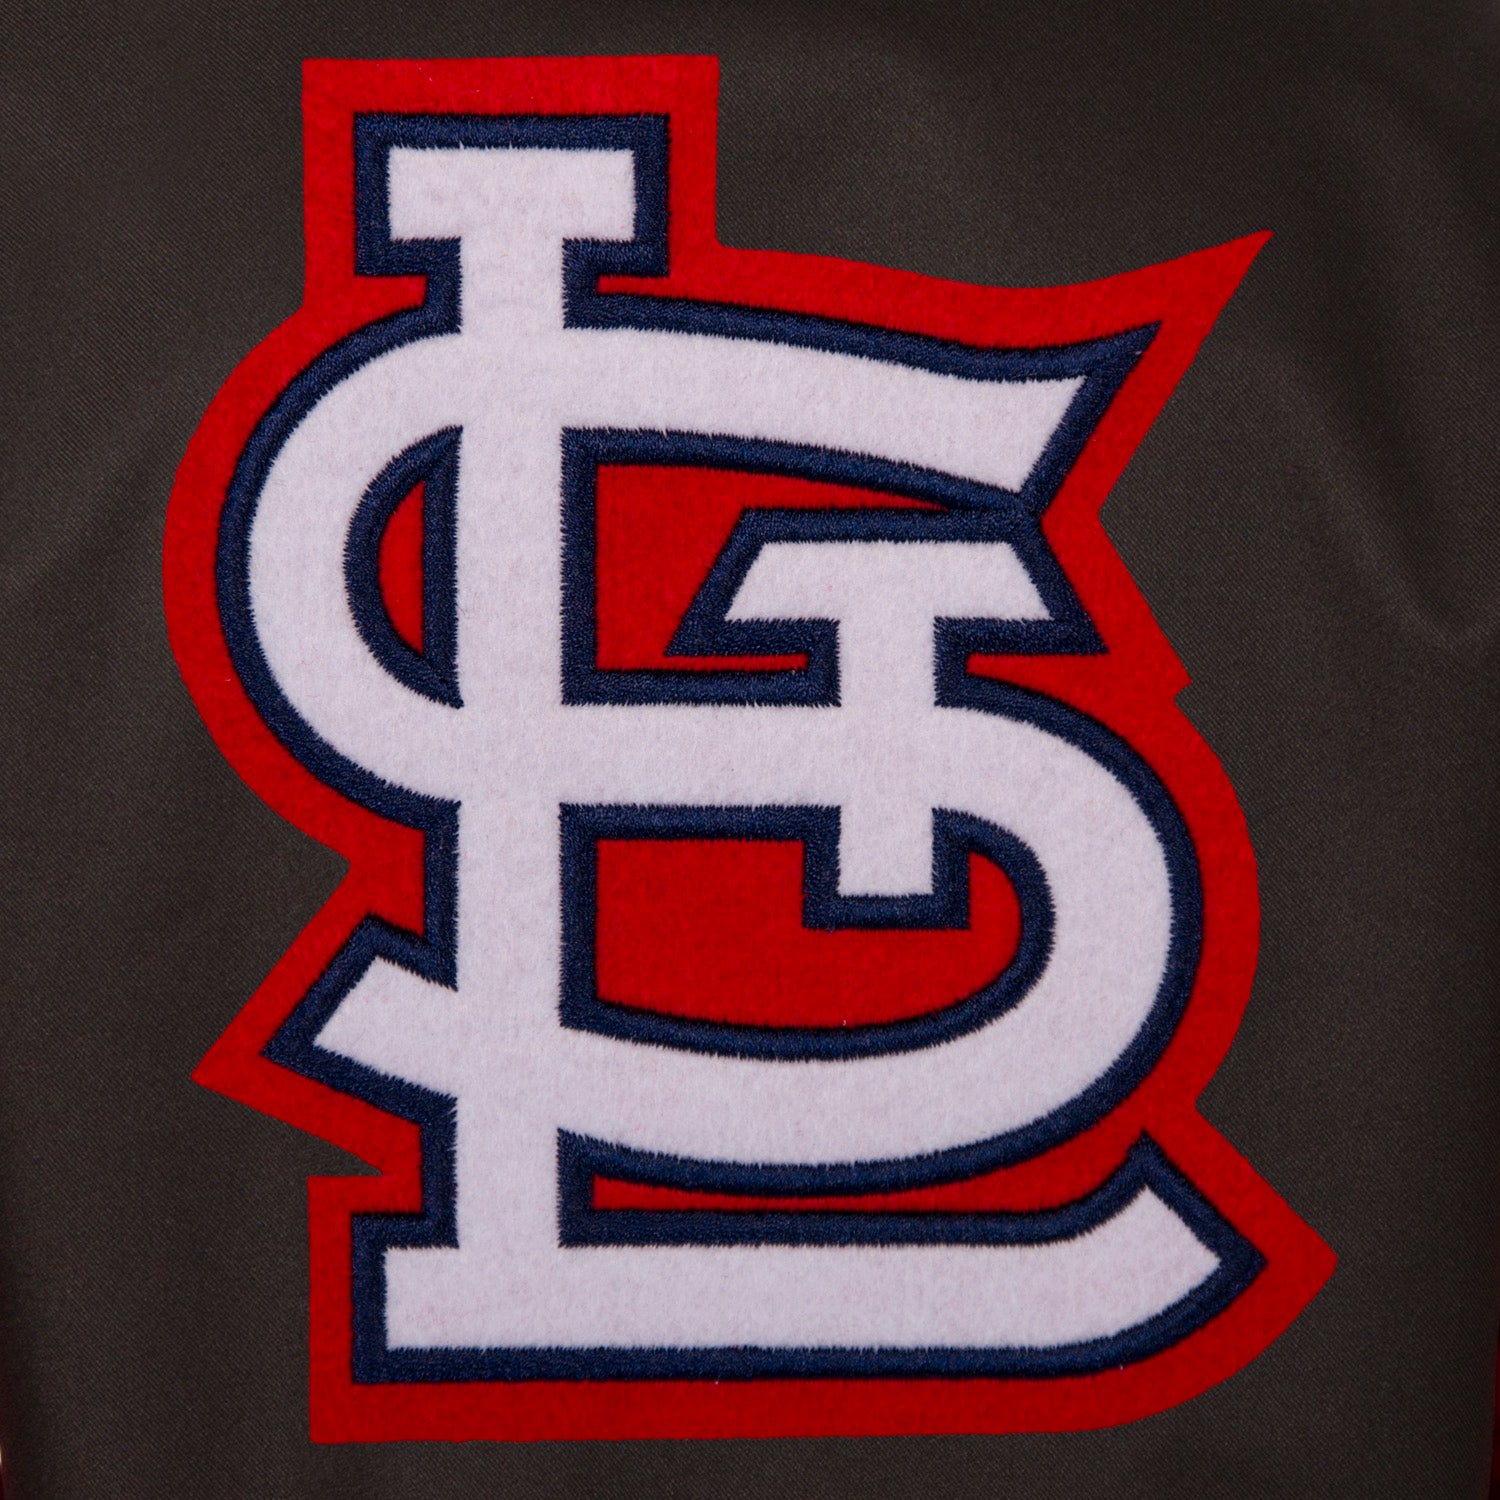 Poly-Twill St. Louis Cardinals Red Jacket